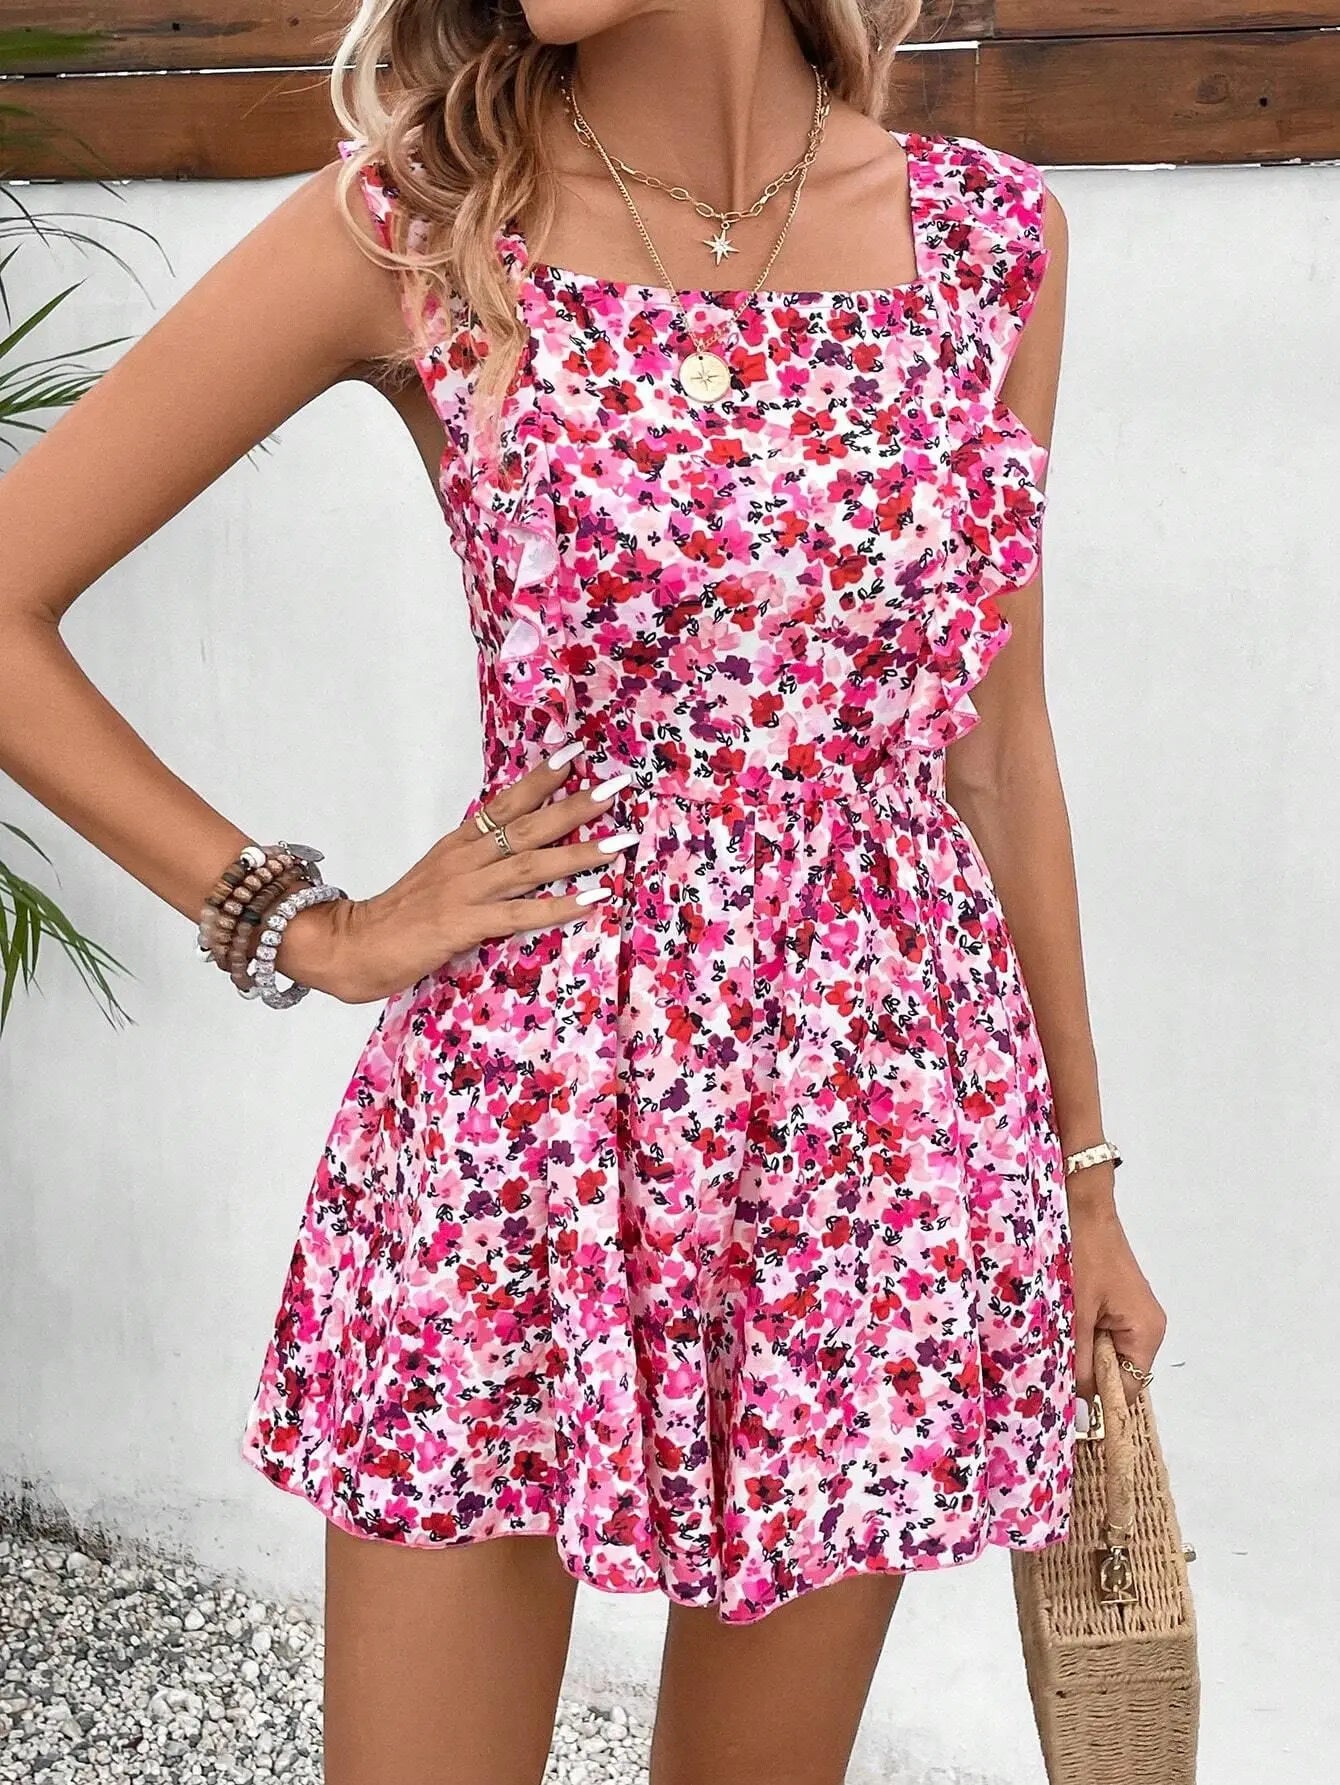 Rompers- Women's Floral Print Playsuit - Bowknot Backless Romper- - Chuzko Women Clothing